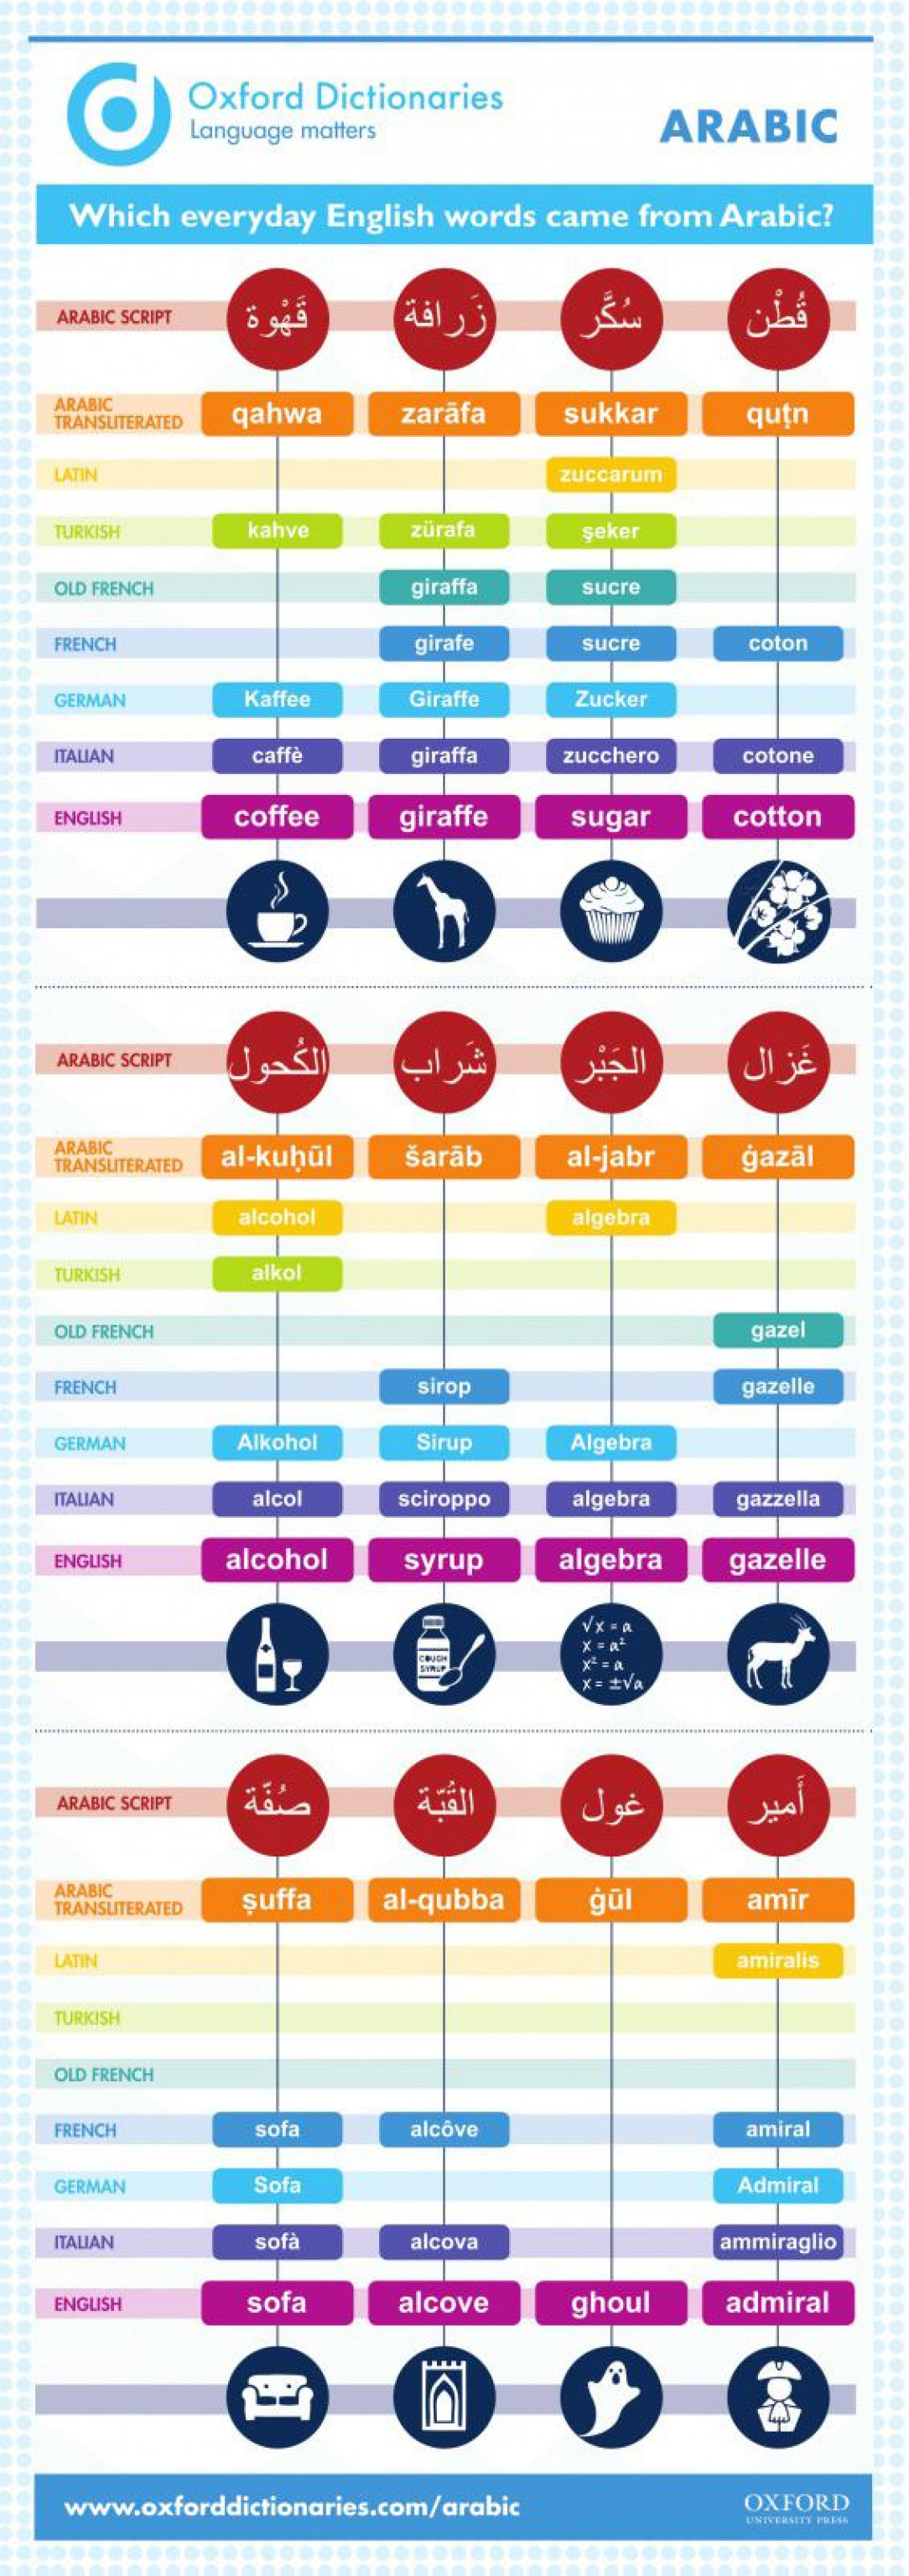 English words you might not have known came from Arabic!